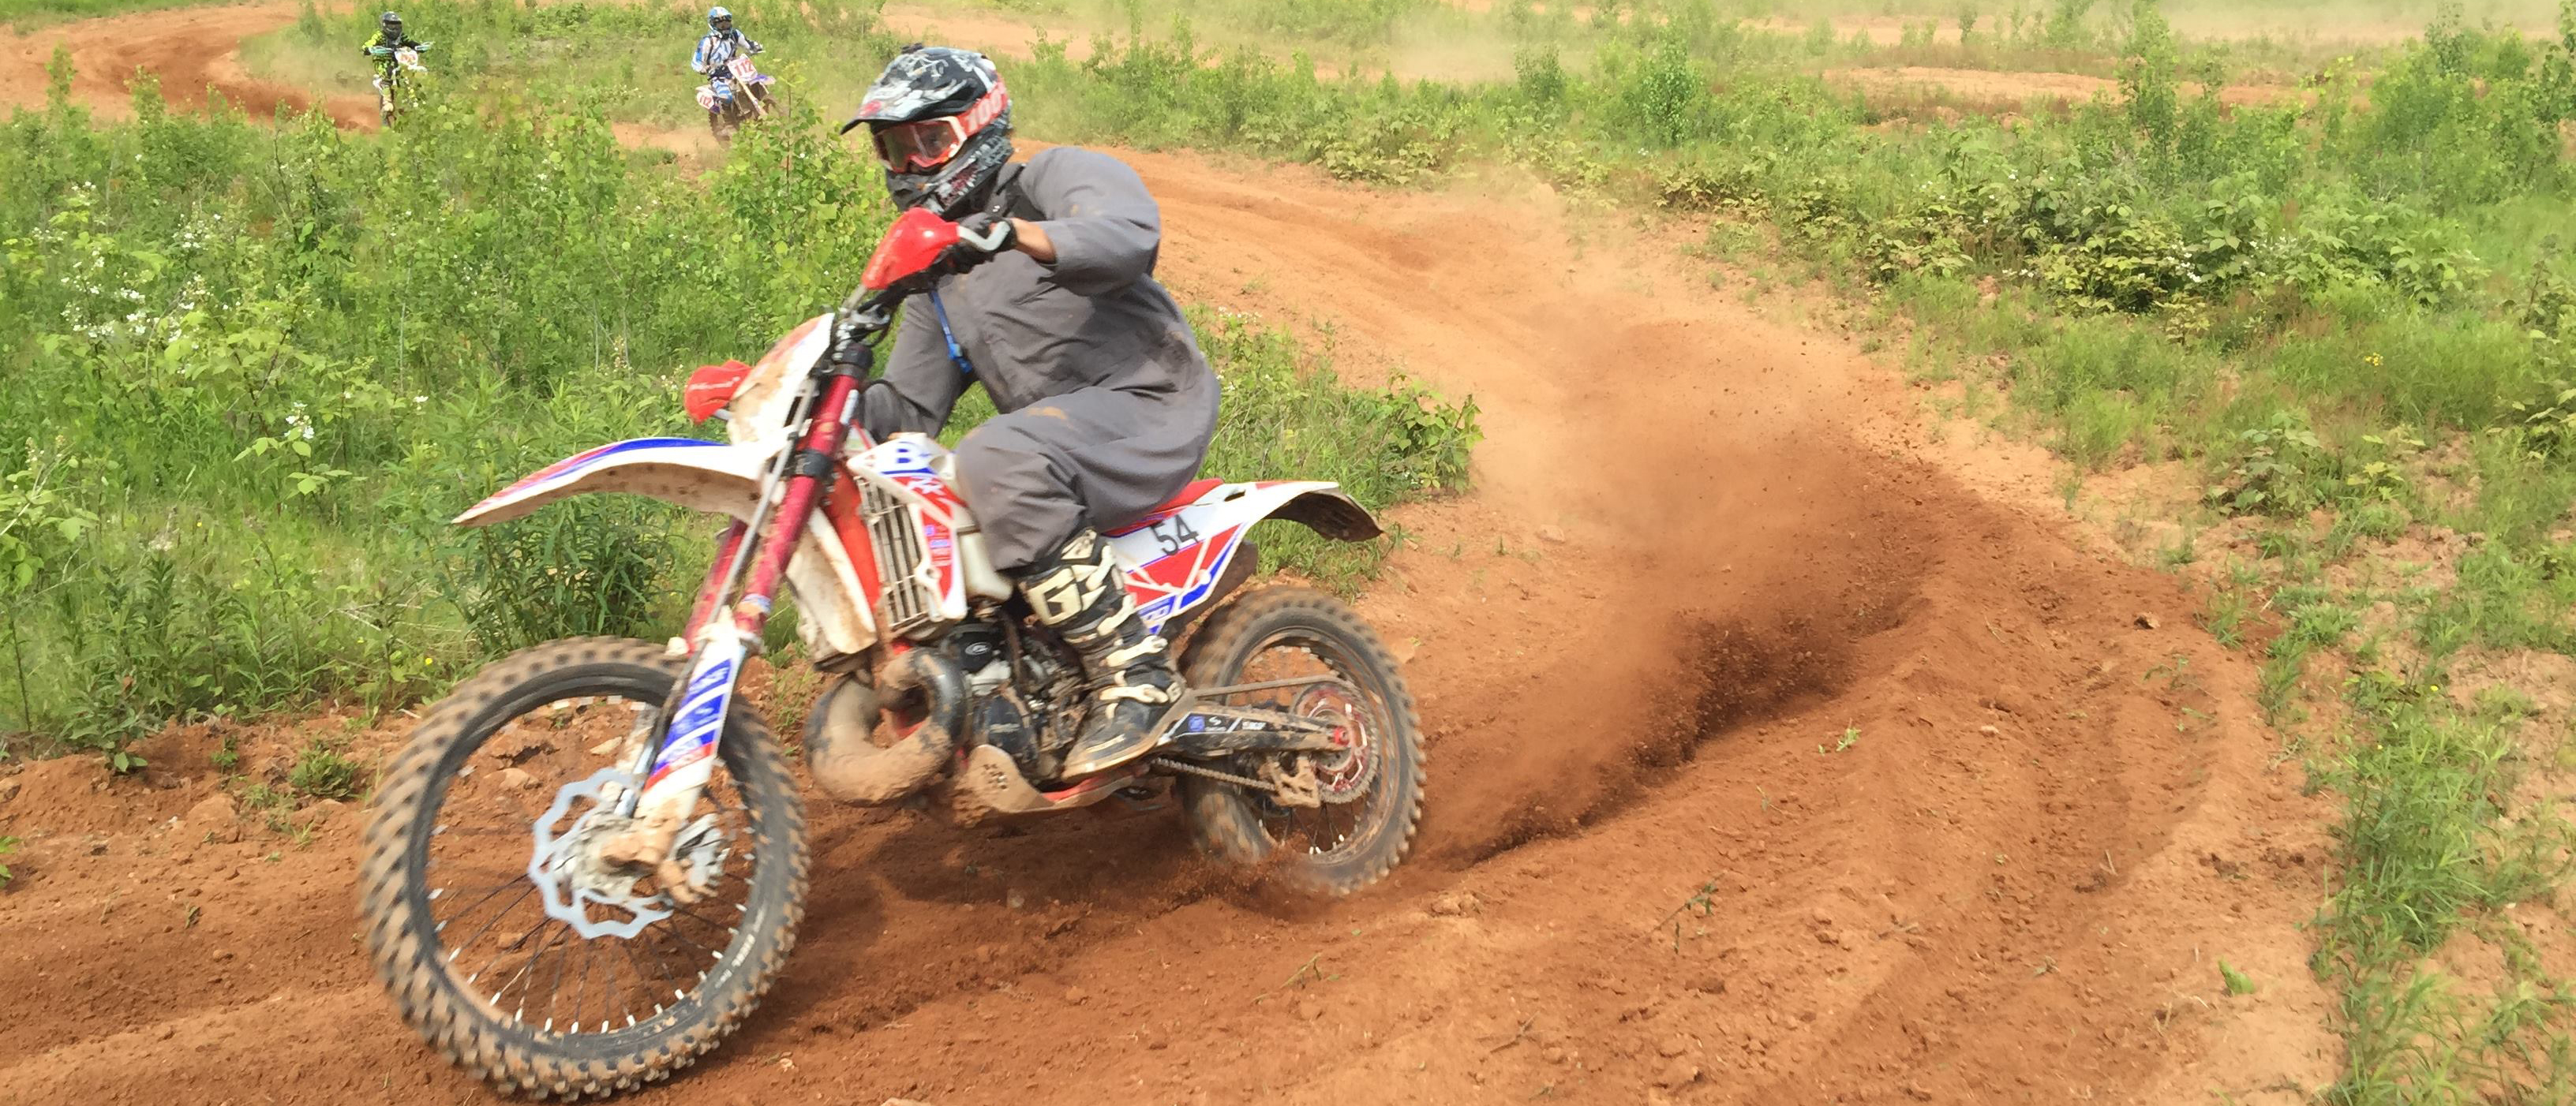 Charging Hard on the moto portion of the Hare Scramble race course